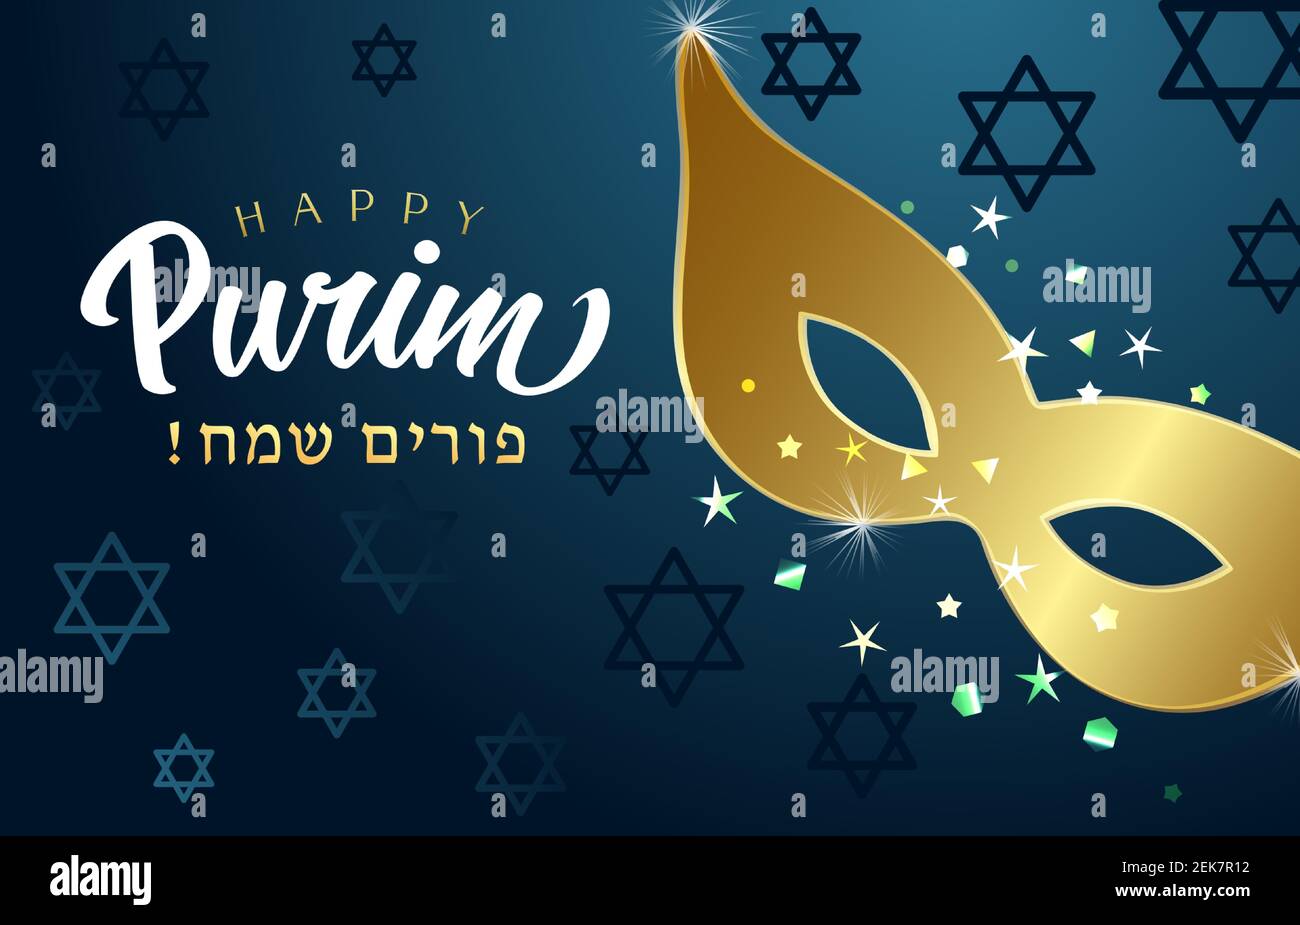 Happy Purim Hebrew text, gold carnival mask and David stars. Golden mask and calligraphy on blue background, Jewish holiday vector illustration Stock Vector